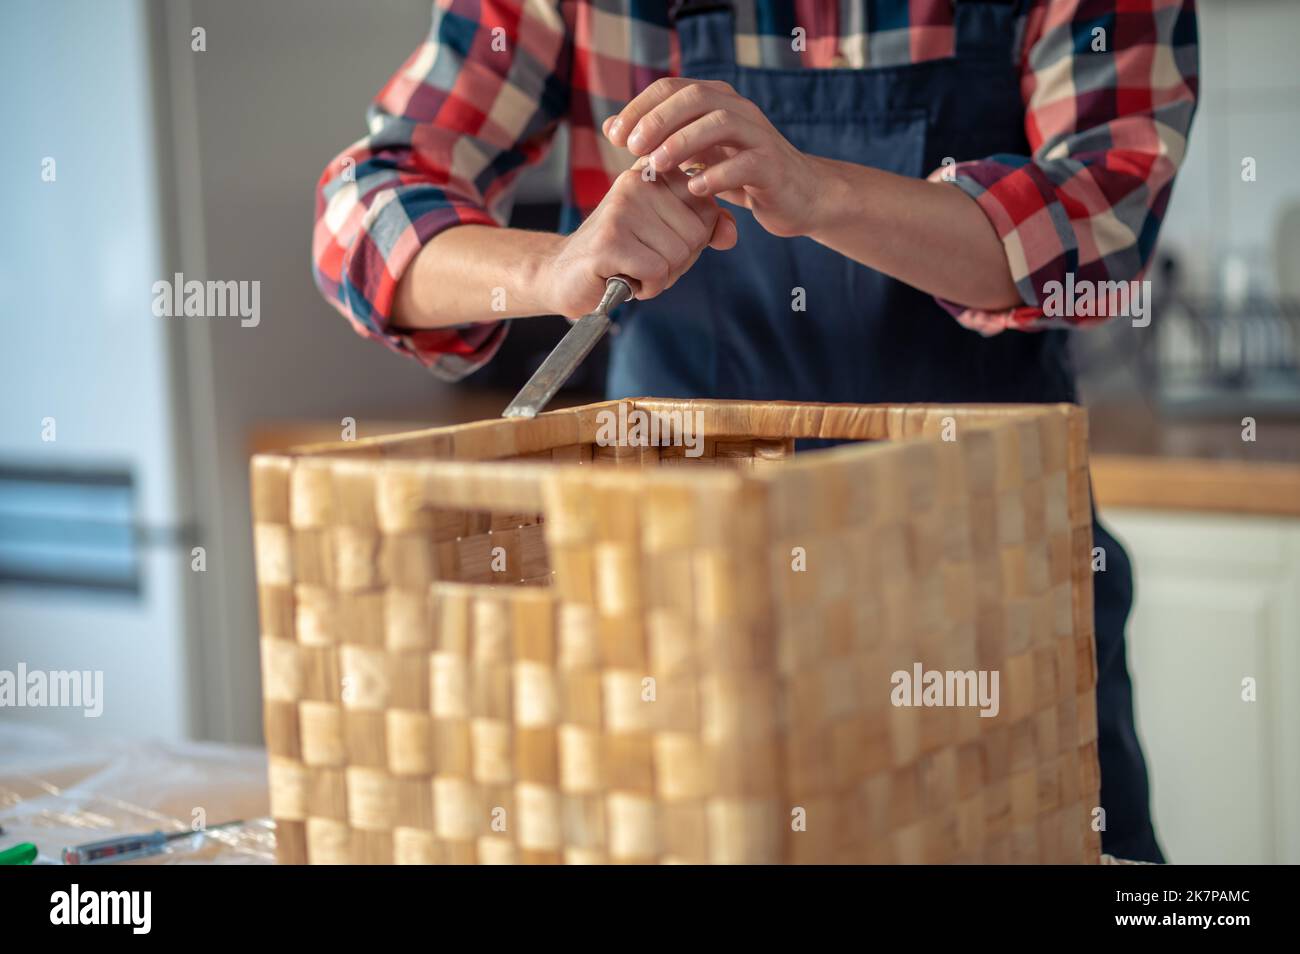 Carpenter removing the excess glue from the finished wood box Stock Photo